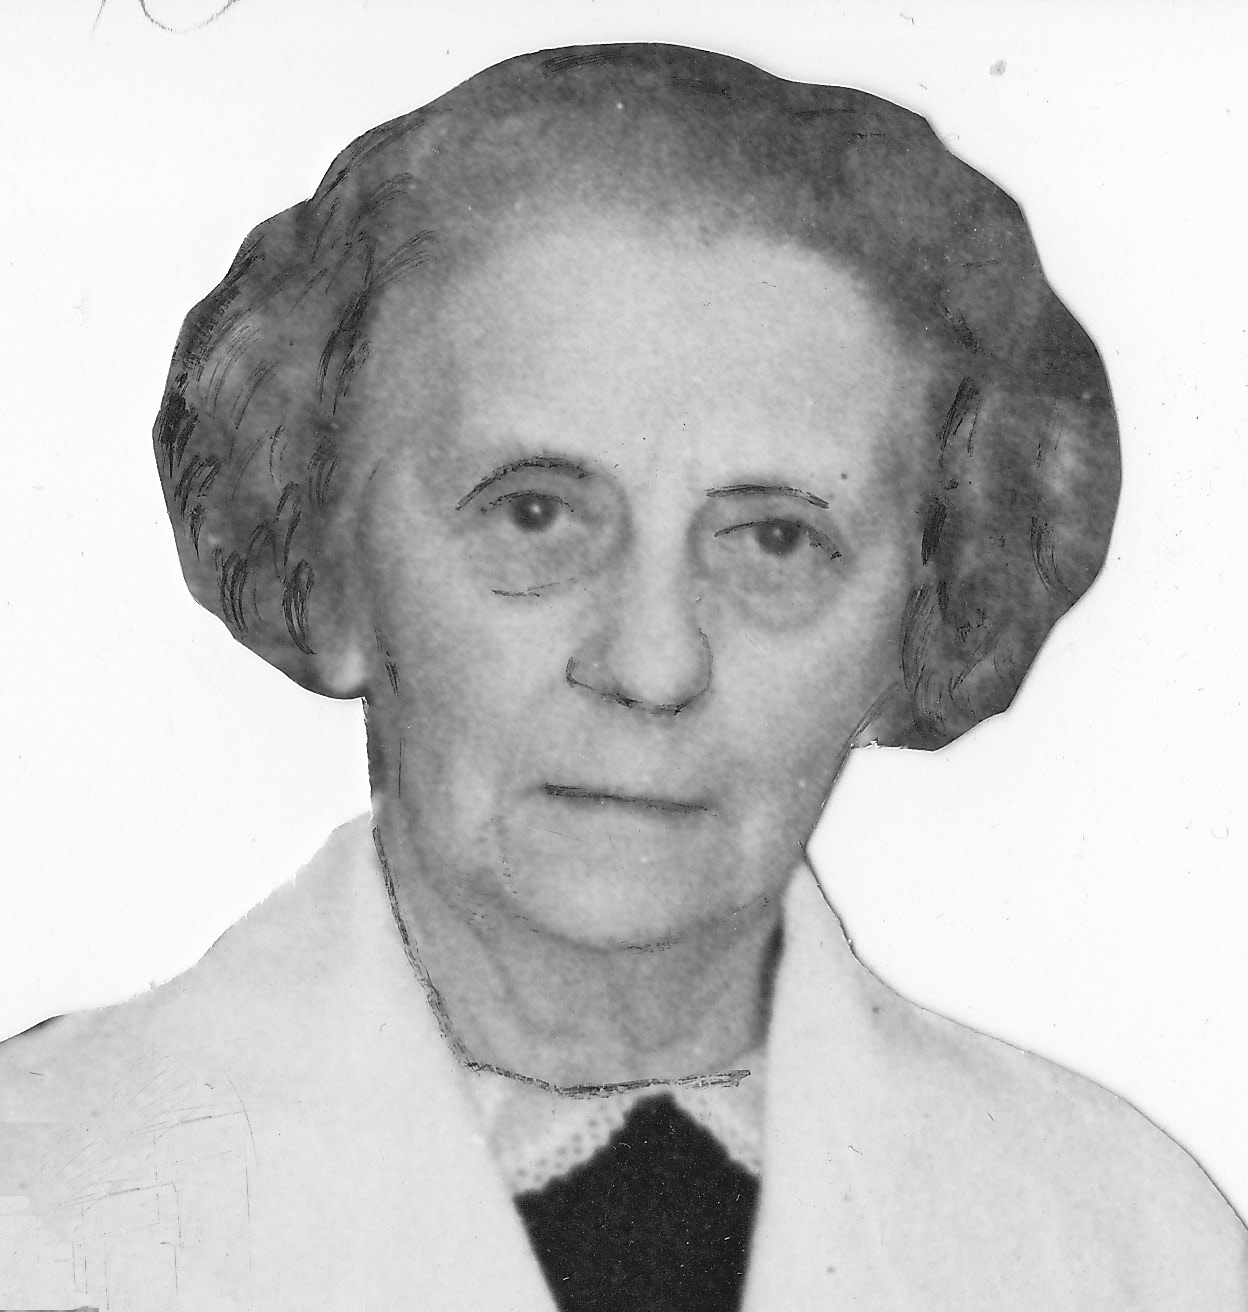 Miss Girling in 1939 on retirement